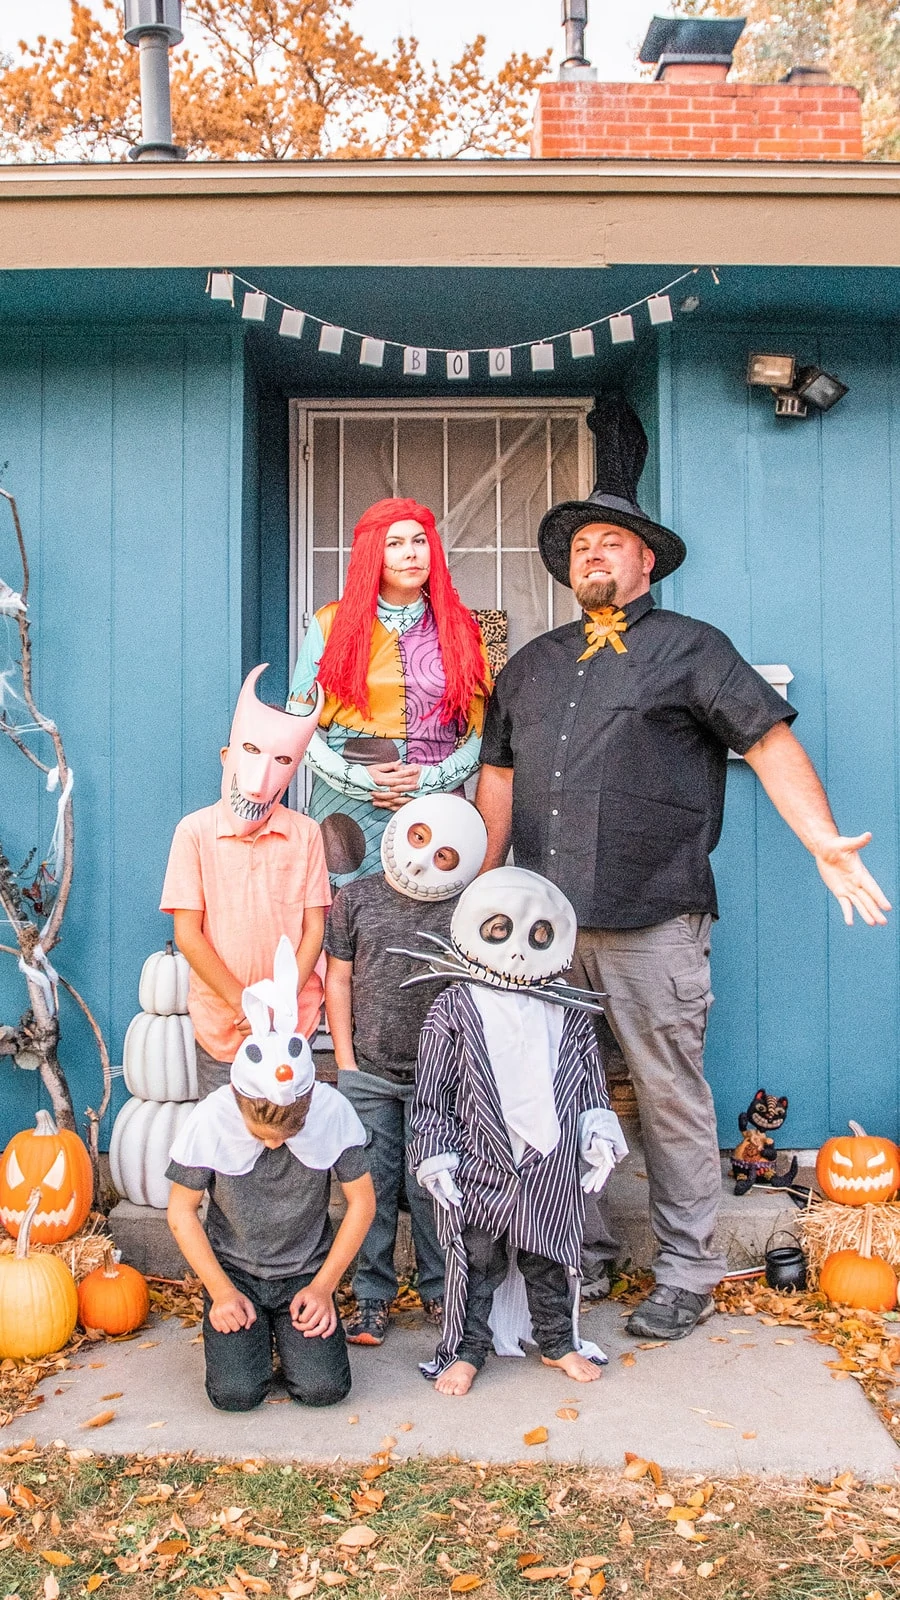 Nightmare Before Christmas Halloween costumes for the family